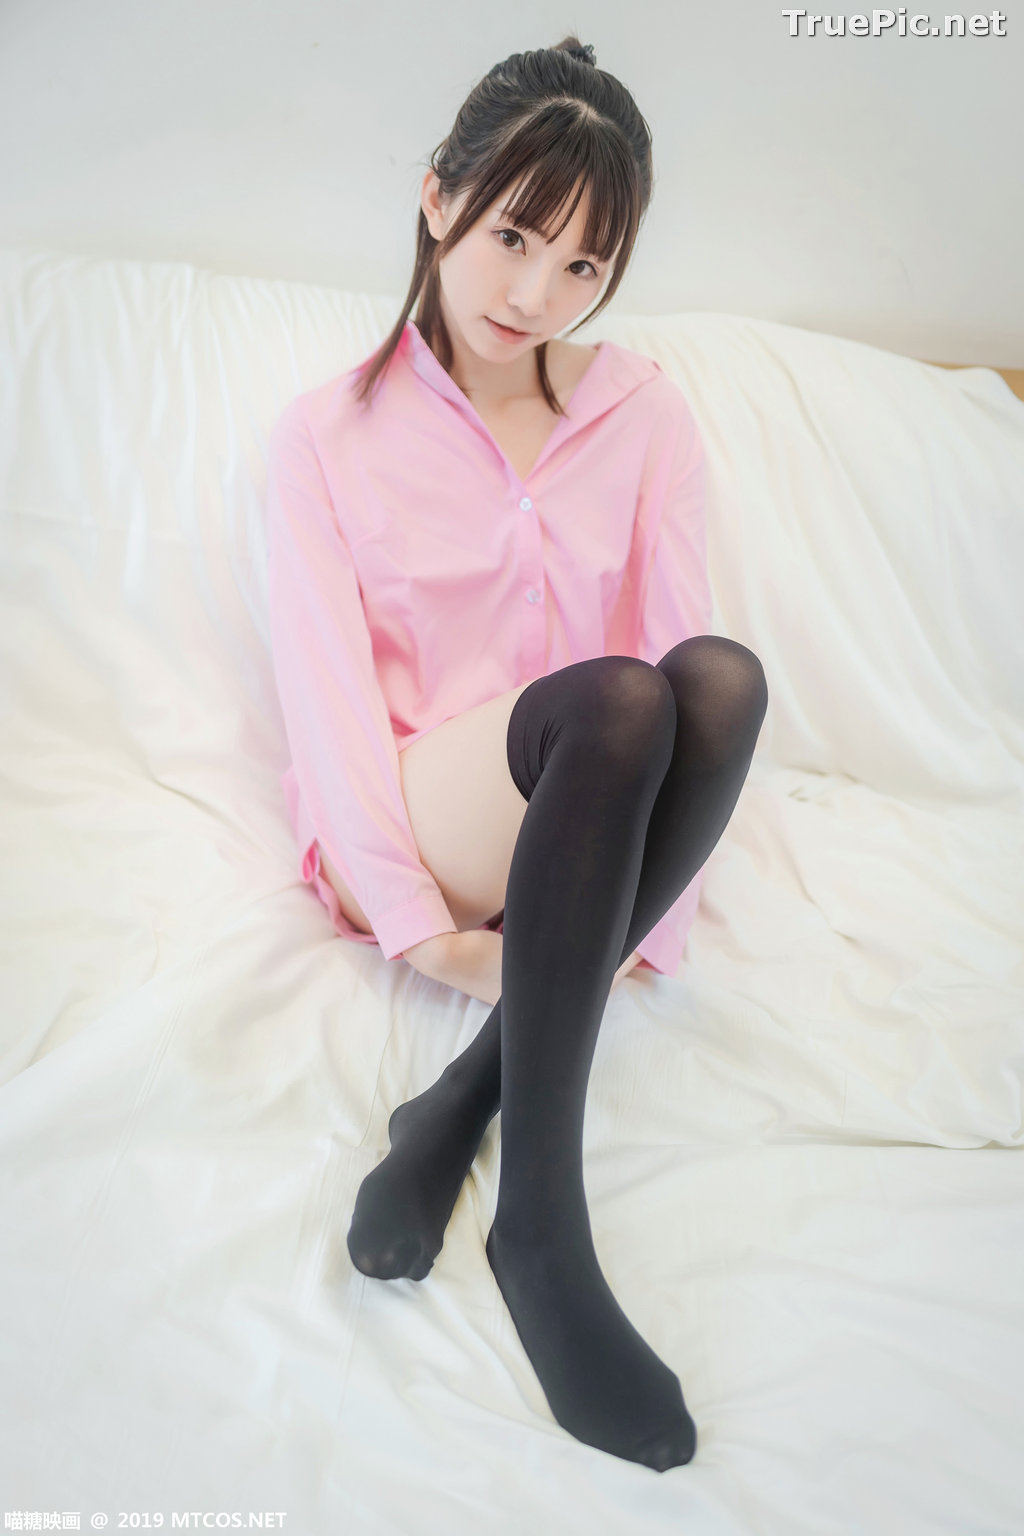 Image [MTCos] 喵糖映画 Vol.022 – Chinese Model – Pink Shirt and Black Stockings - TruePic.net - Picture-20